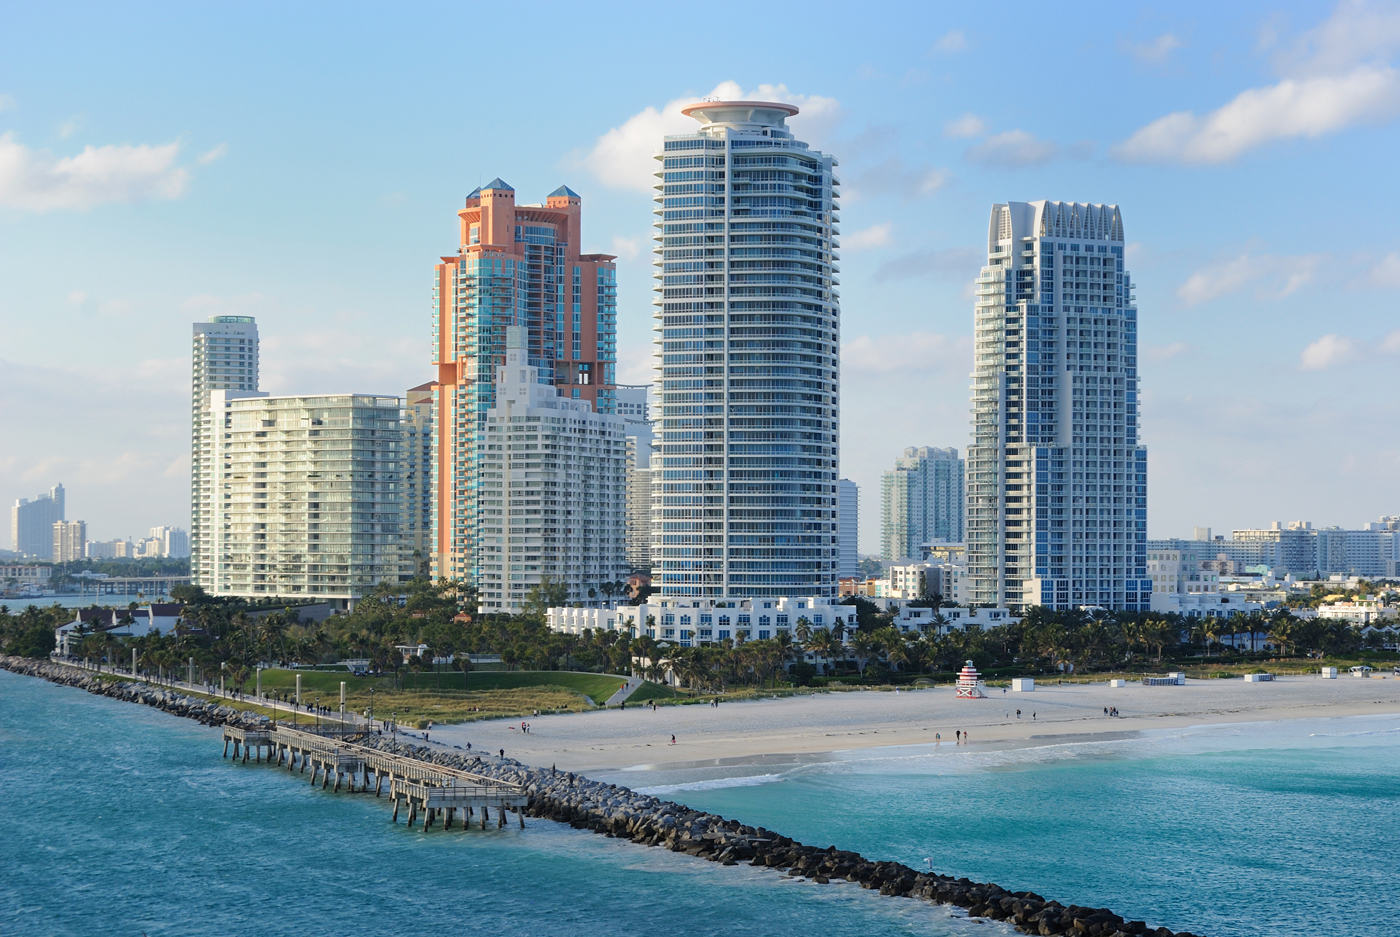 Luxury Condo Sales Rising Along With Inventory In Miami-Dade